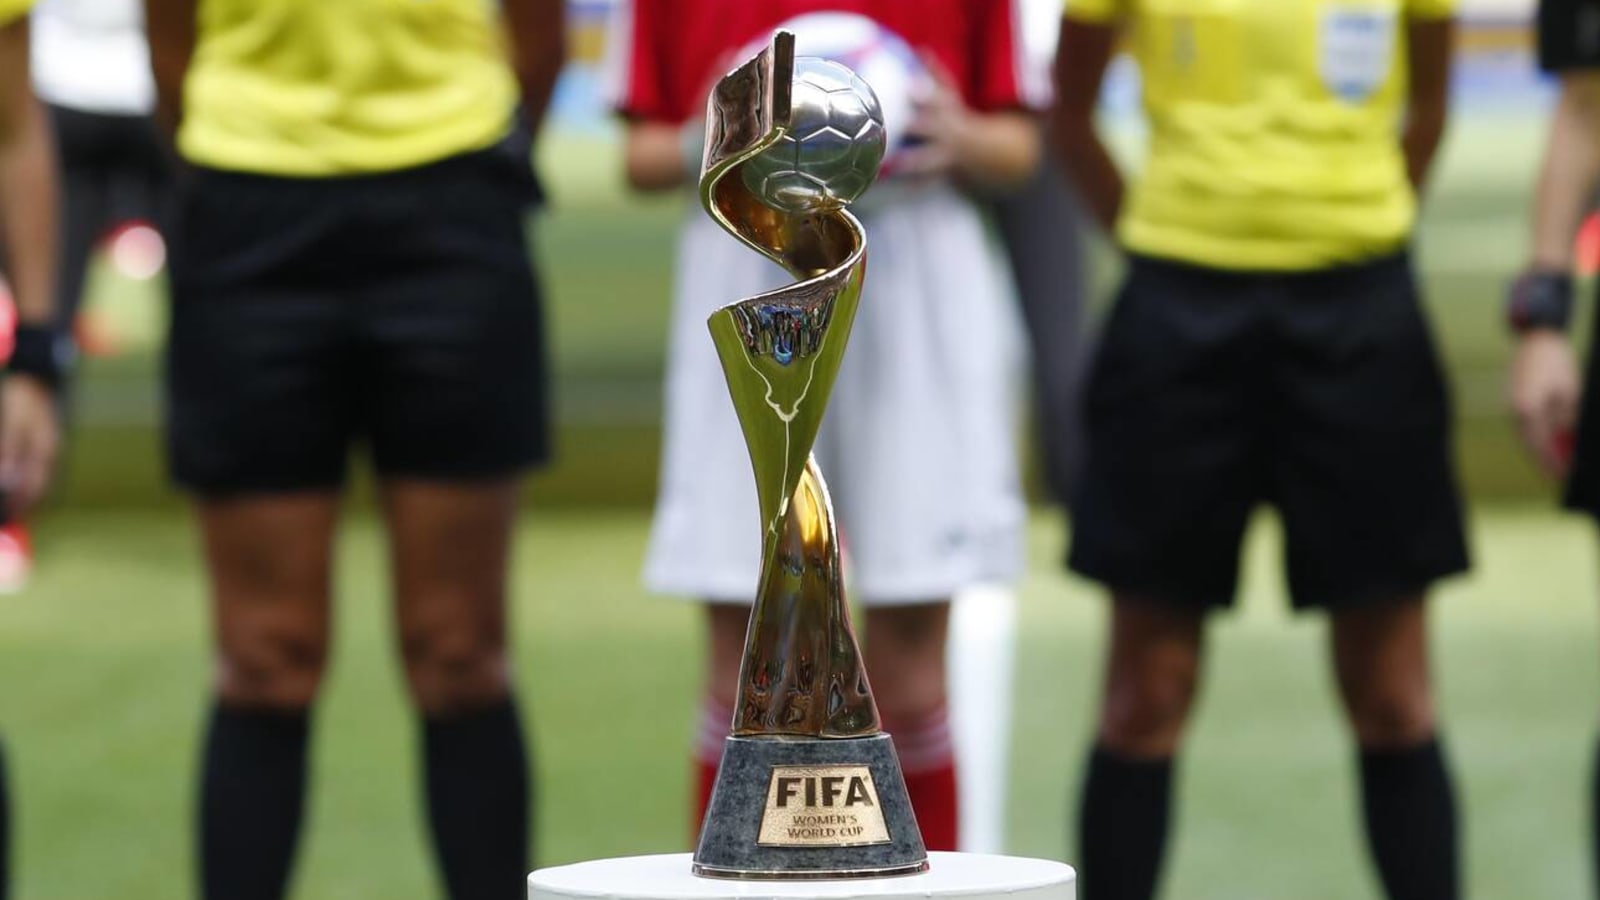 2023 Women's World Cup to go ahead as scheduled amid rumors